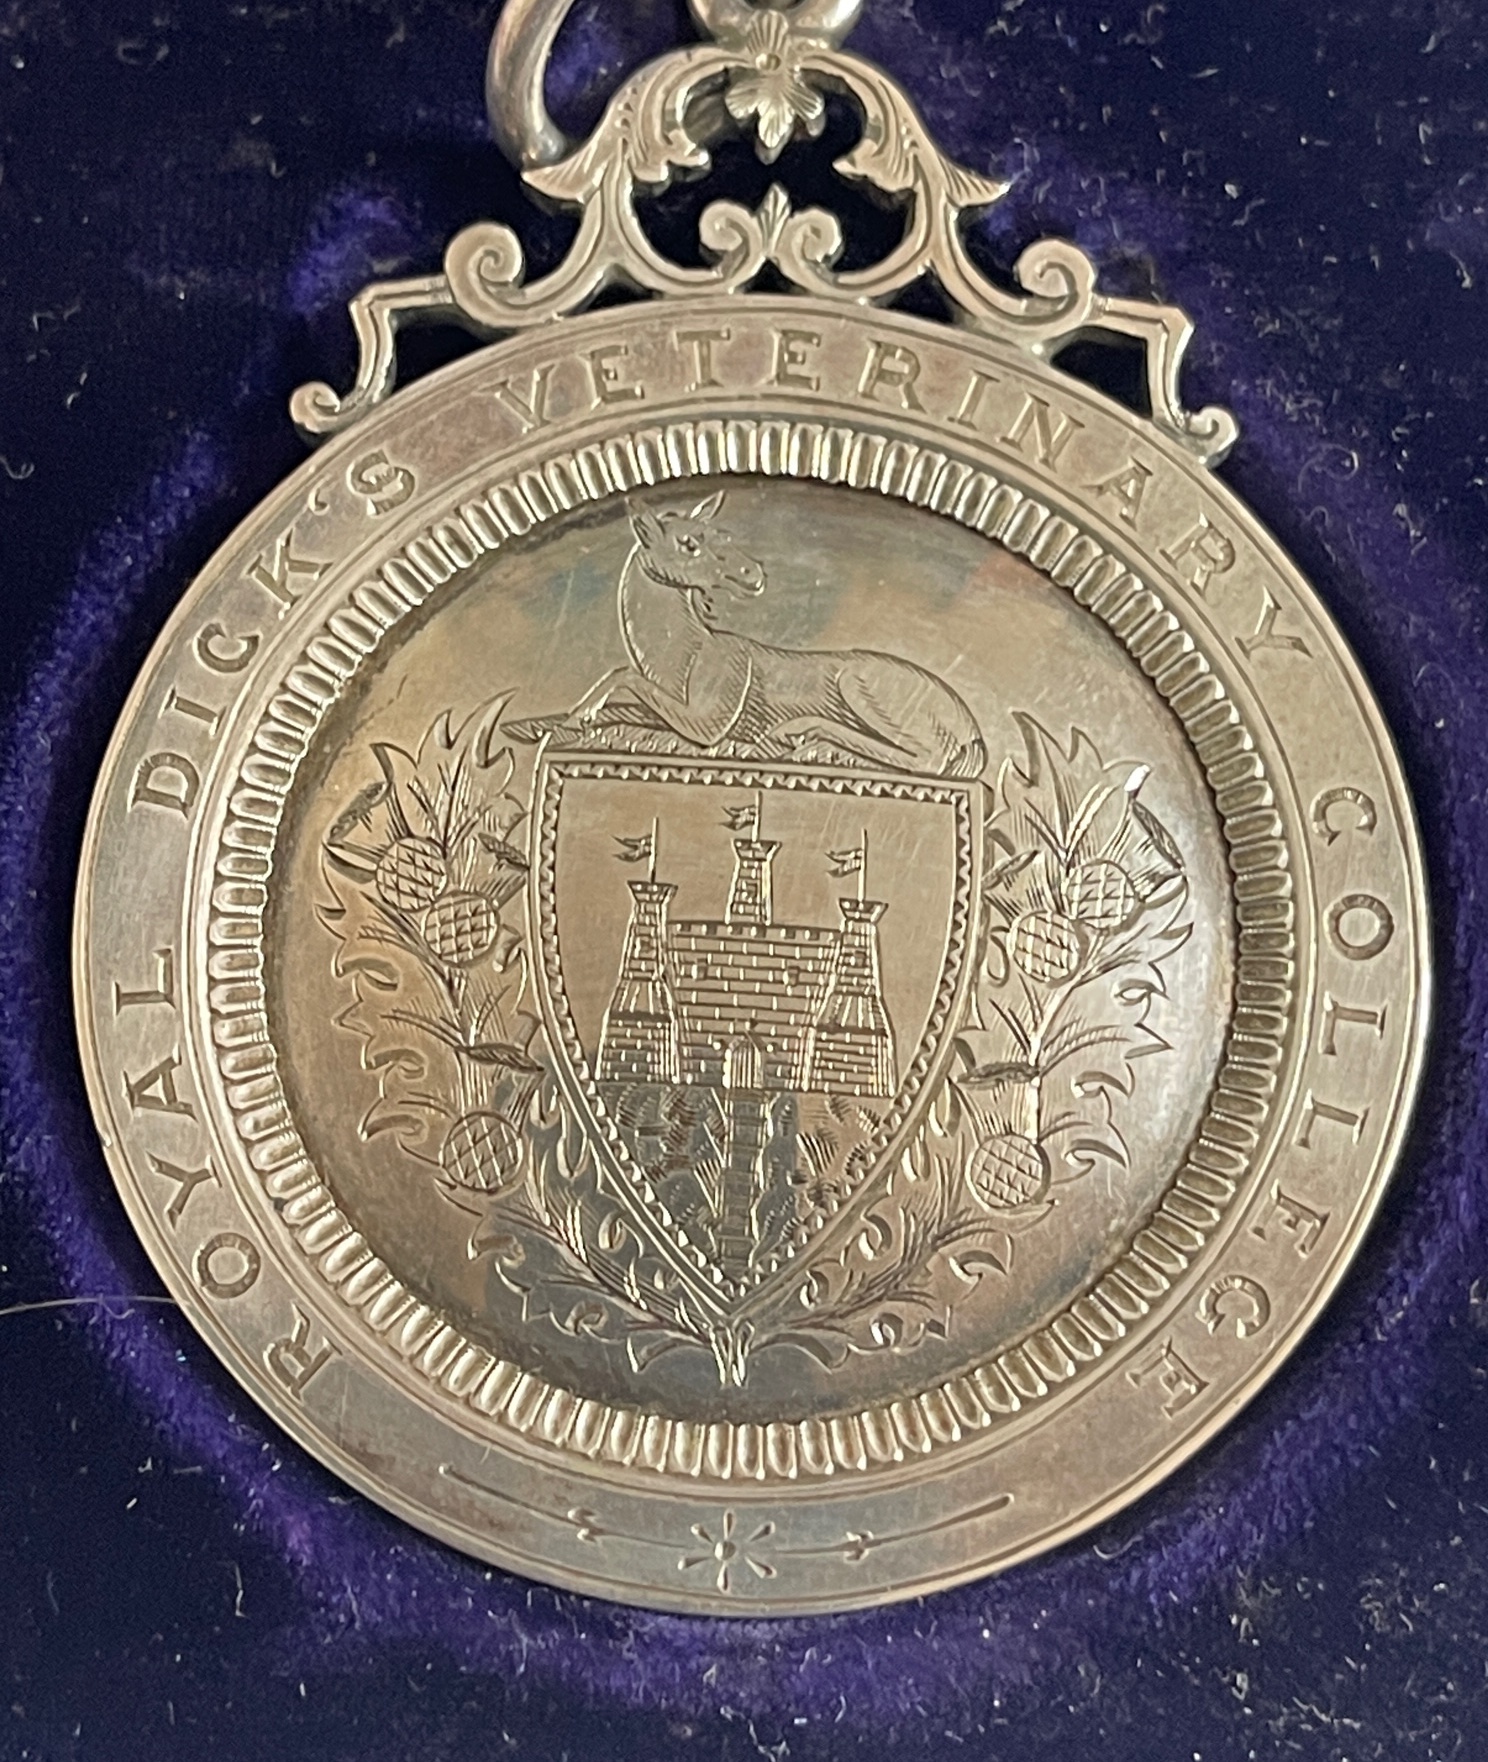 Antique Boxed Royal Dicks Veterinary College Medal awarded to a W Smith 1881 - 66mm x 49mm. - Image 2 of 4